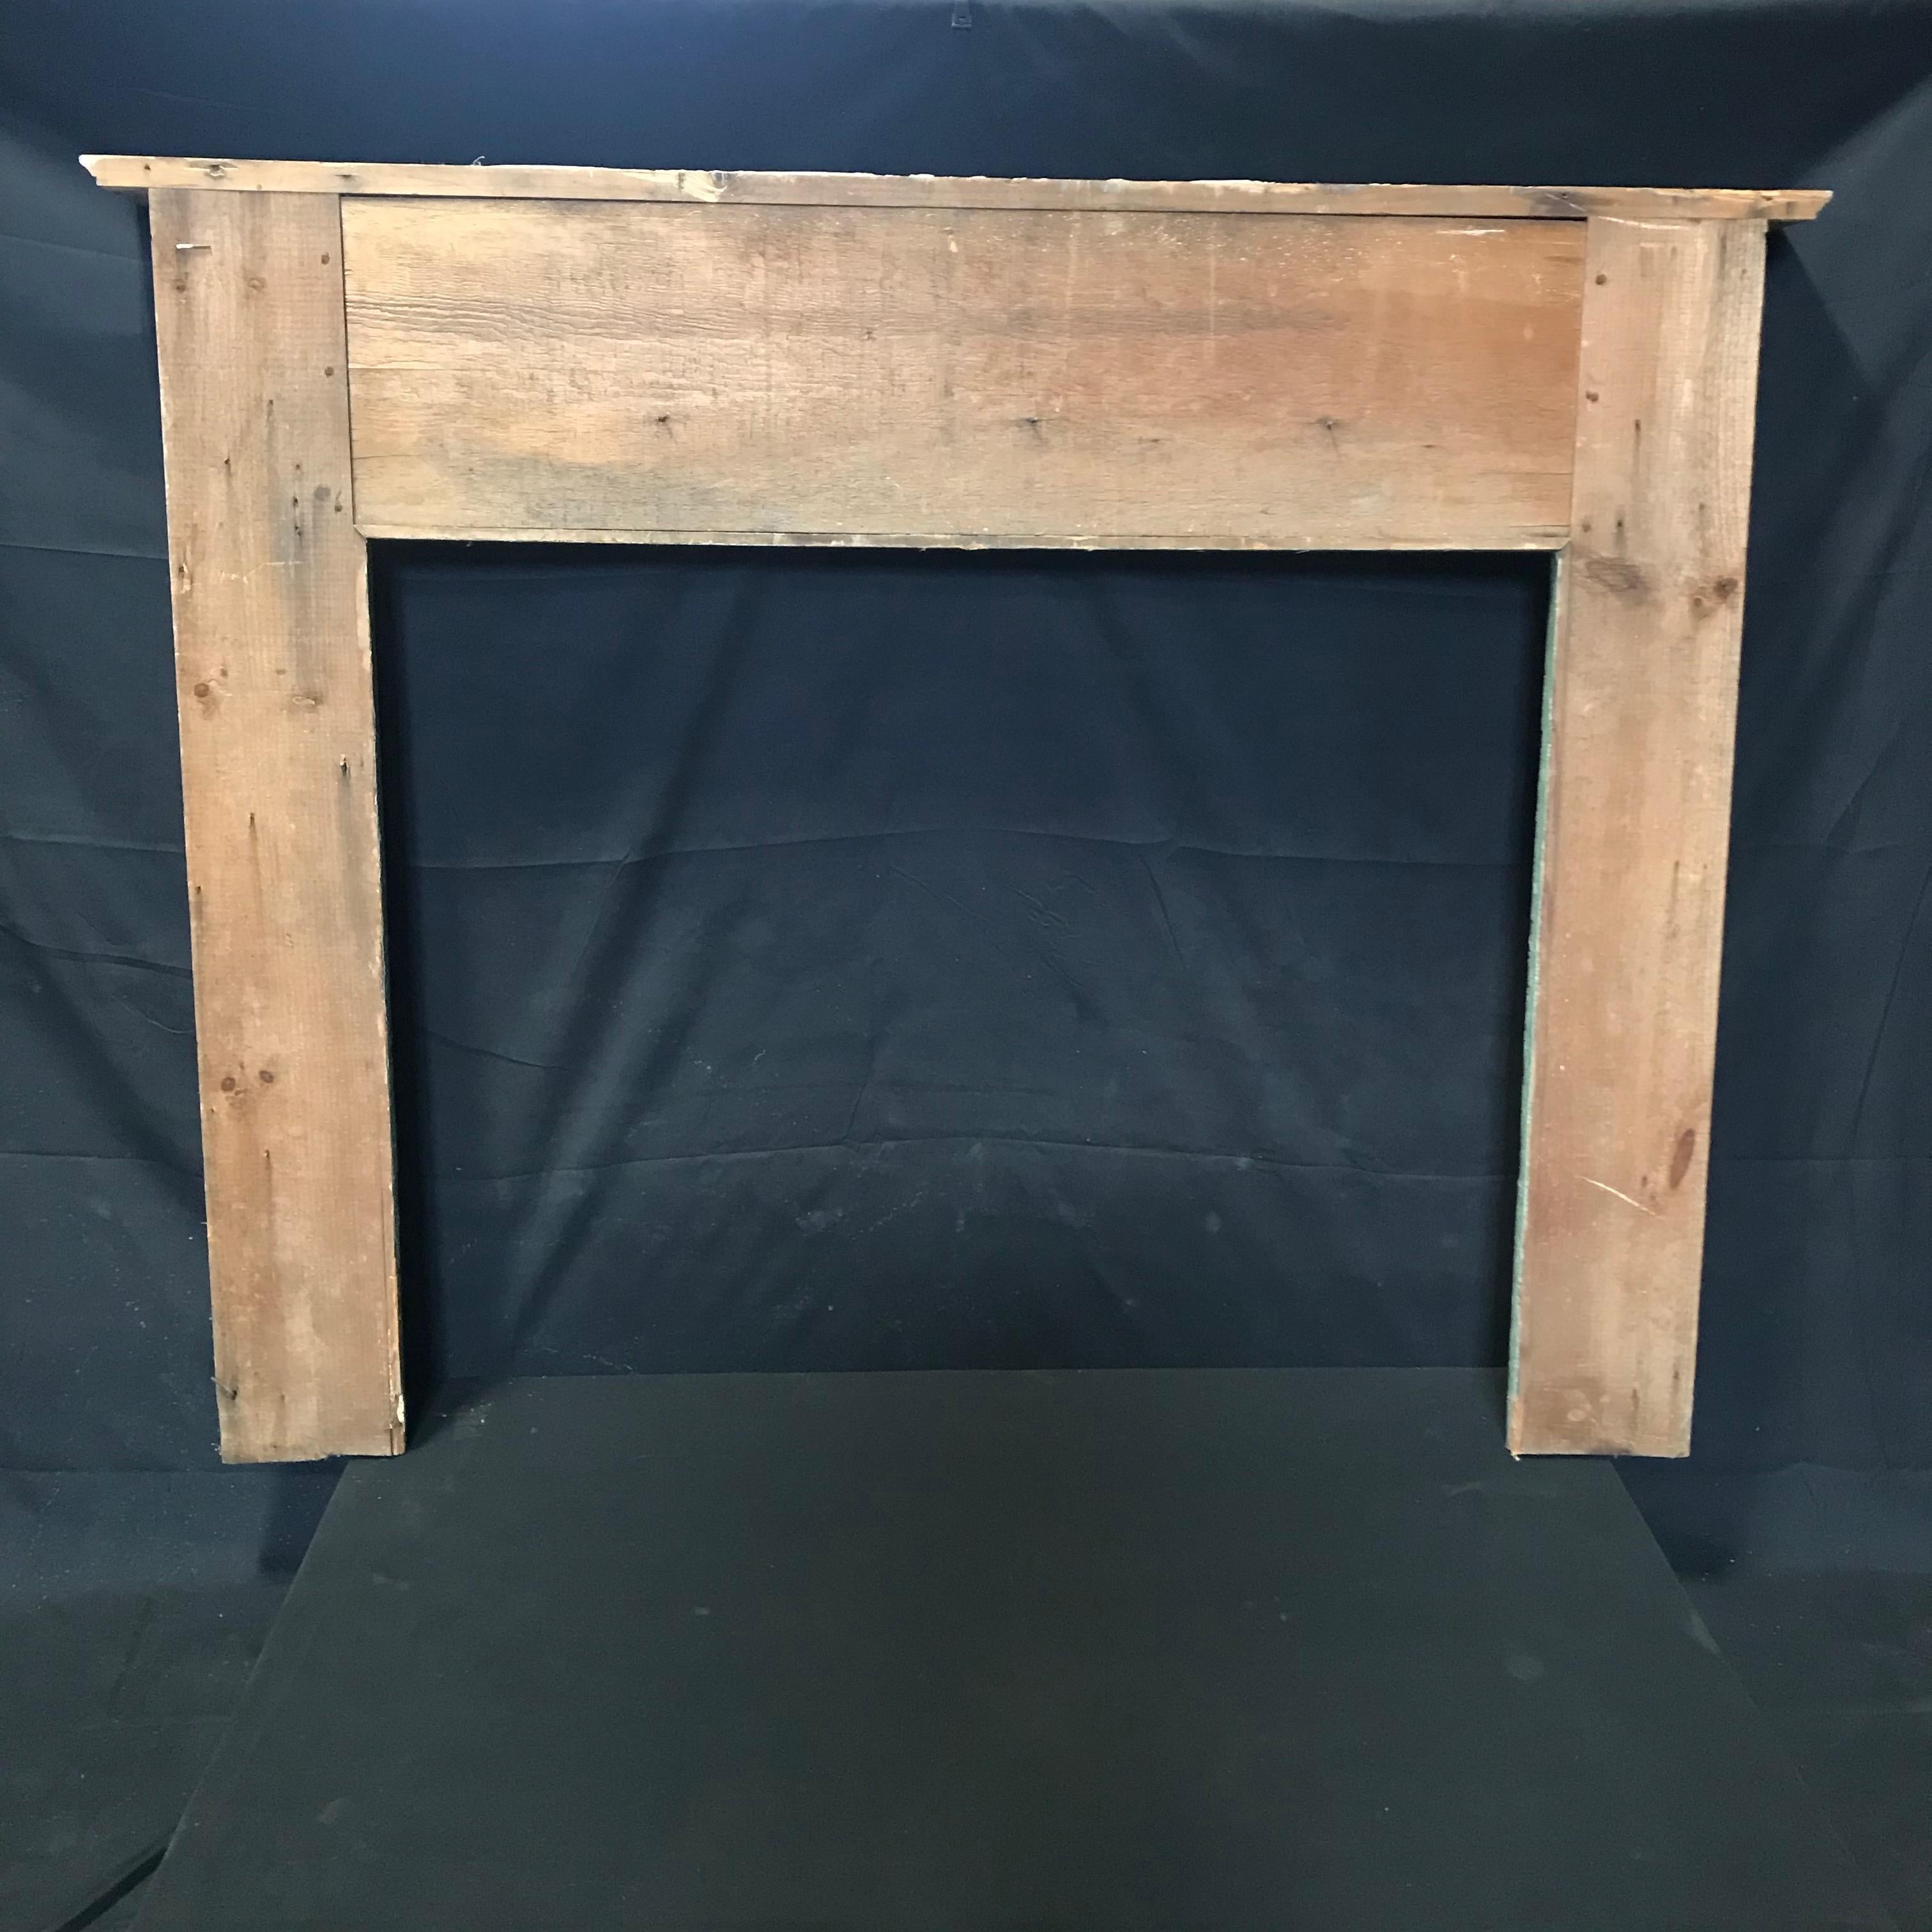 Early Important Federal Fireplace Mantel with Original Paint 7